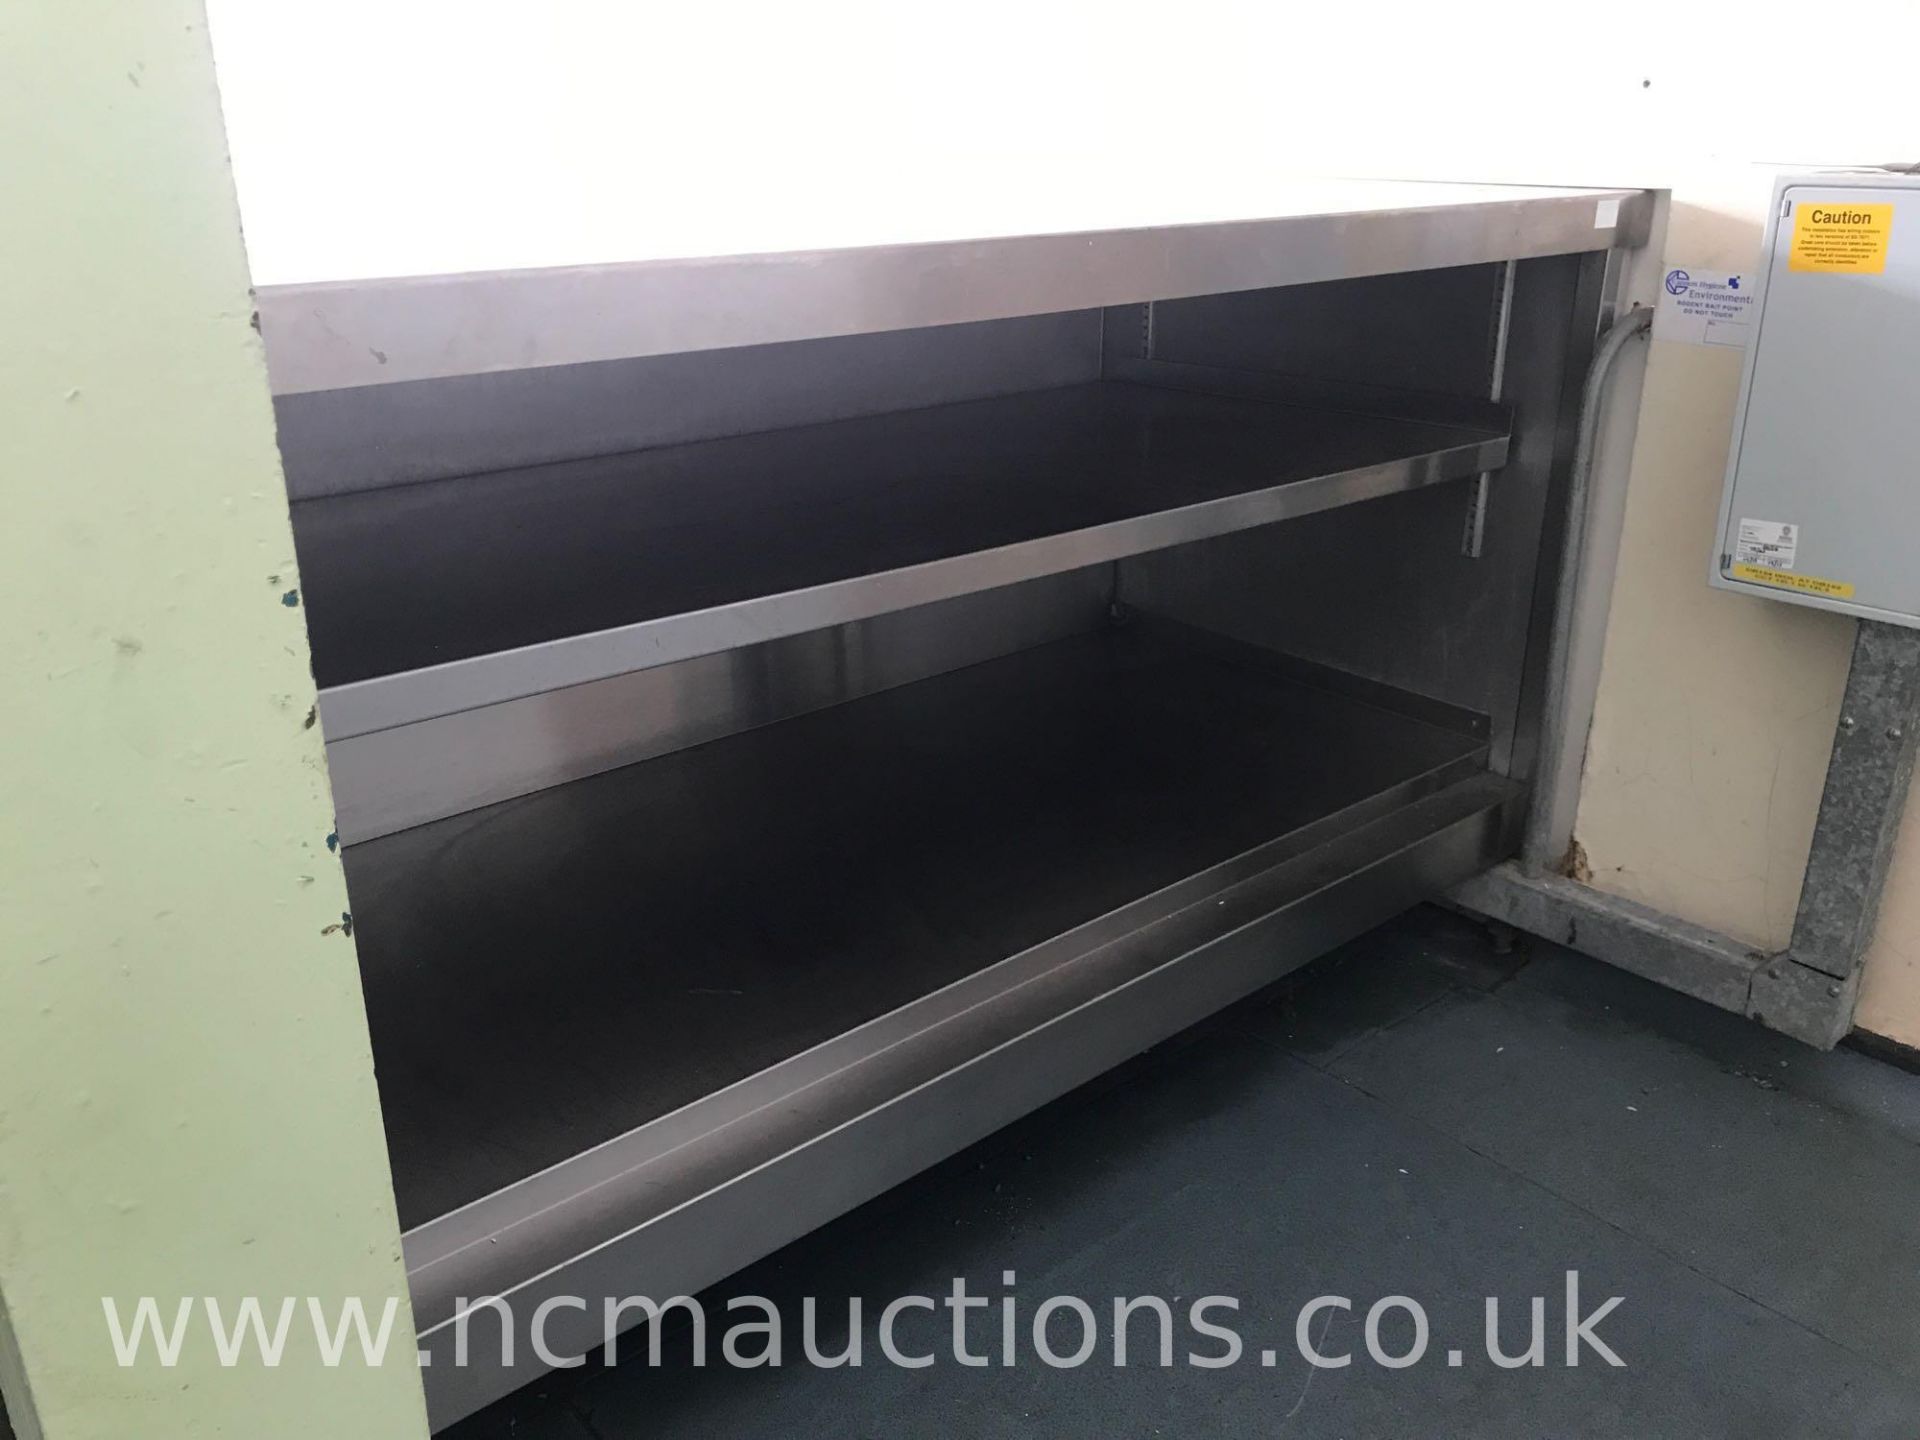 Stainless Steel Serving Counter with Shelving - Image 3 of 3